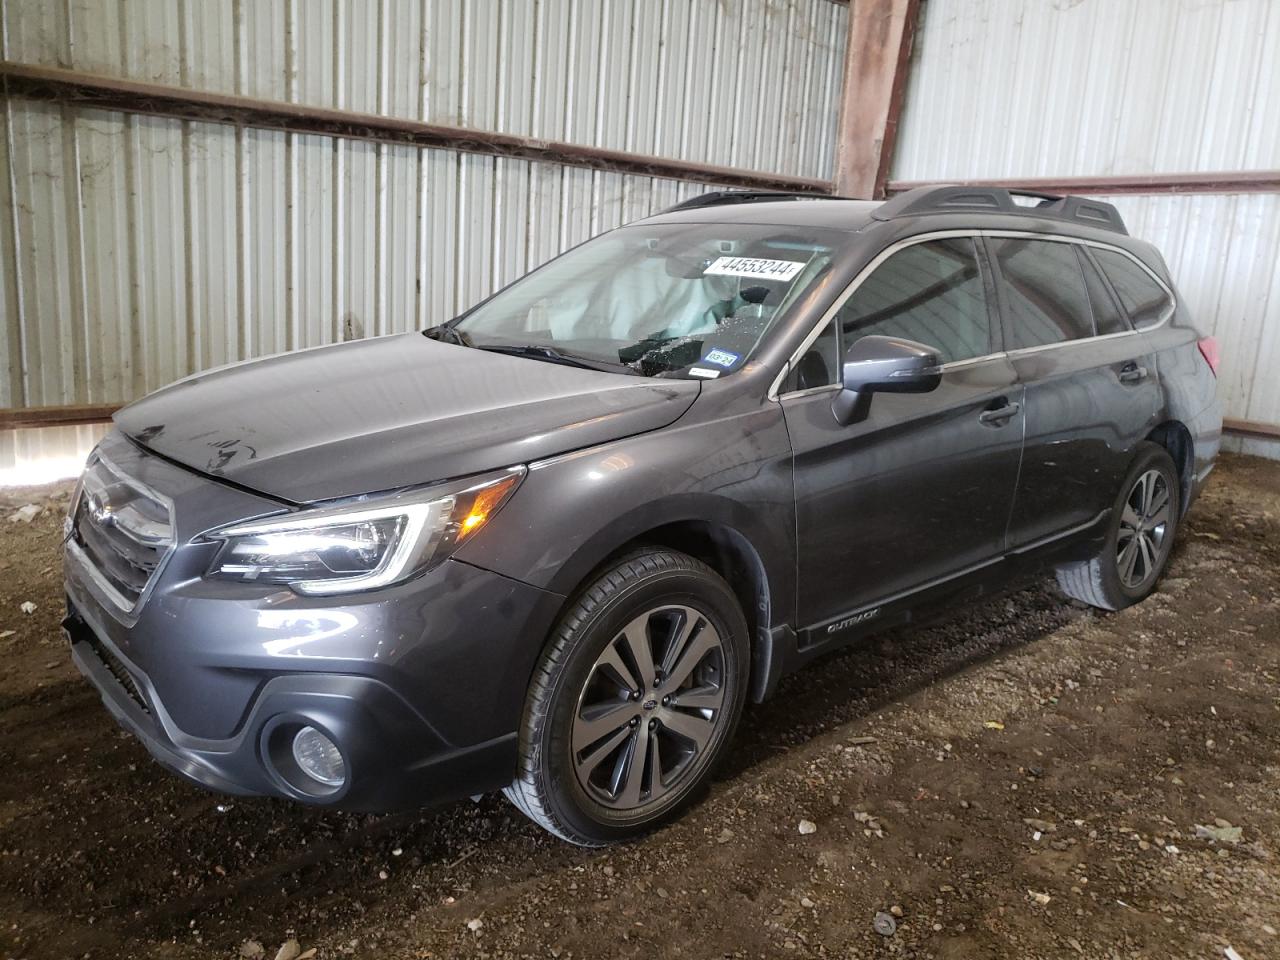 vin: 4S4BSENC1J3332334 4S4BSENC1J3332334 2018 subaru outback 3600 for Sale in 77049 1968, Tx - Houston East, Houston, USA